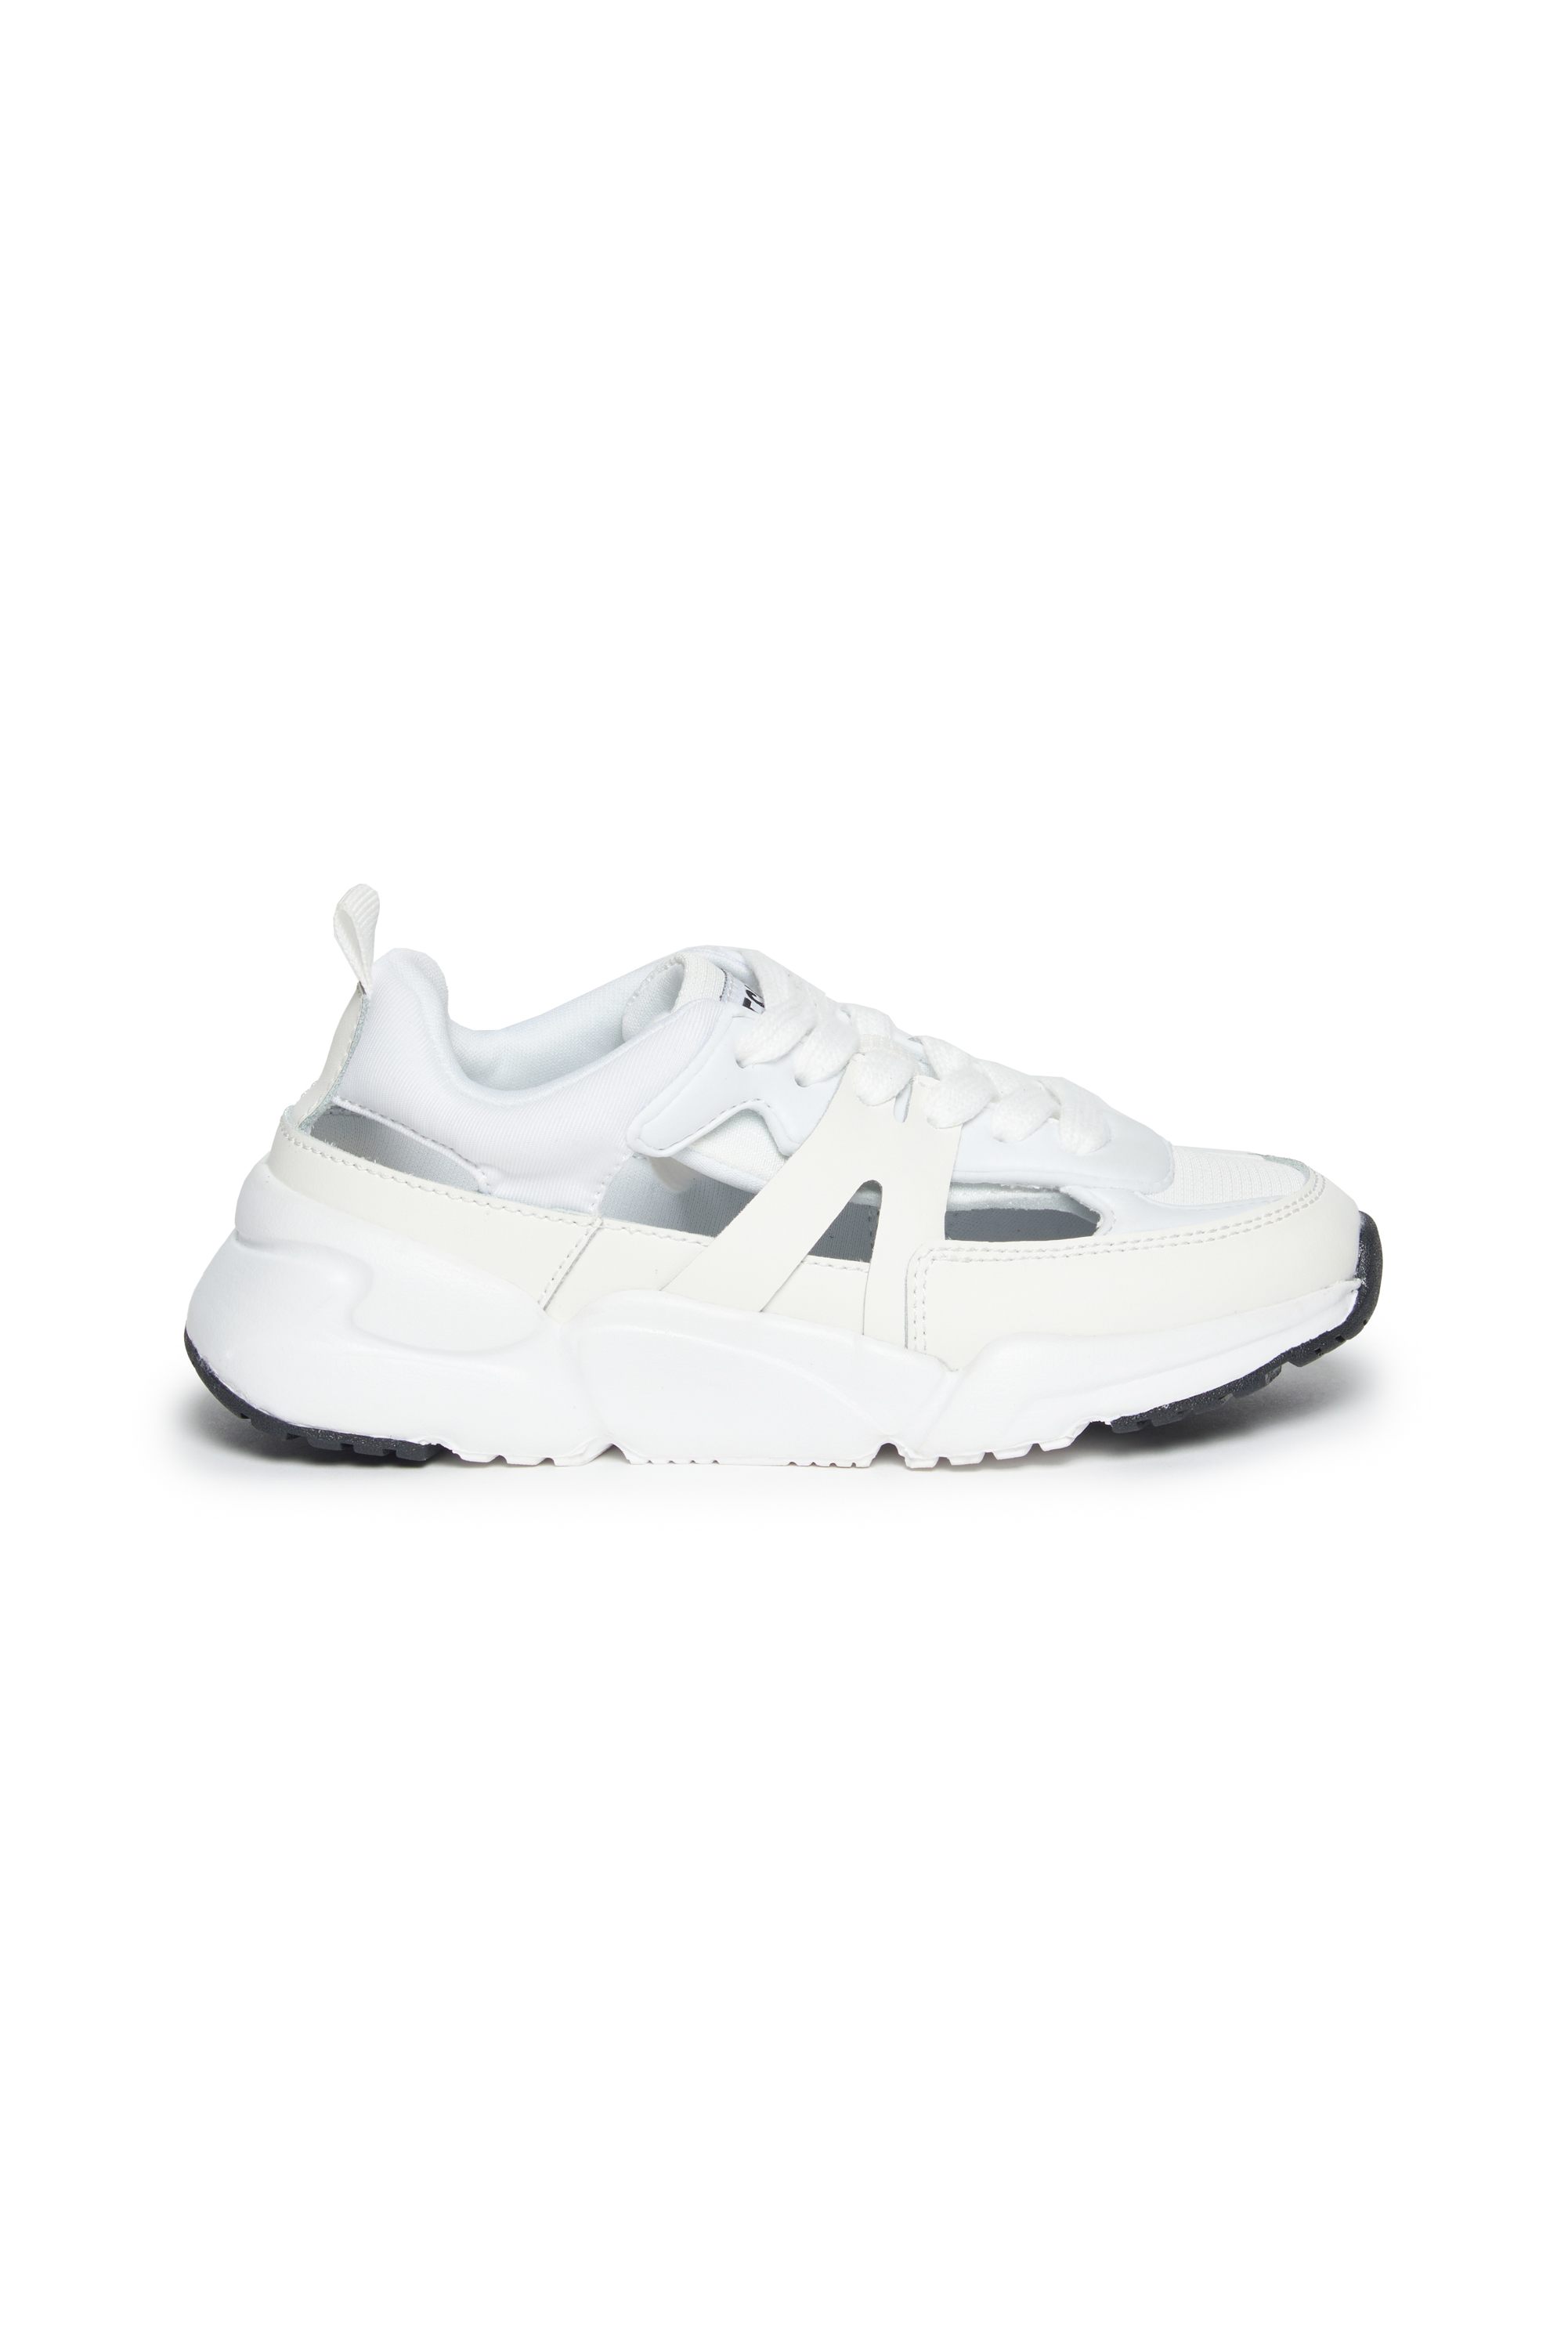 Diesel - S-MILLENIUM LCS PRO, Unisex Sandal sneaker in ripstop and leather in White - Image 1